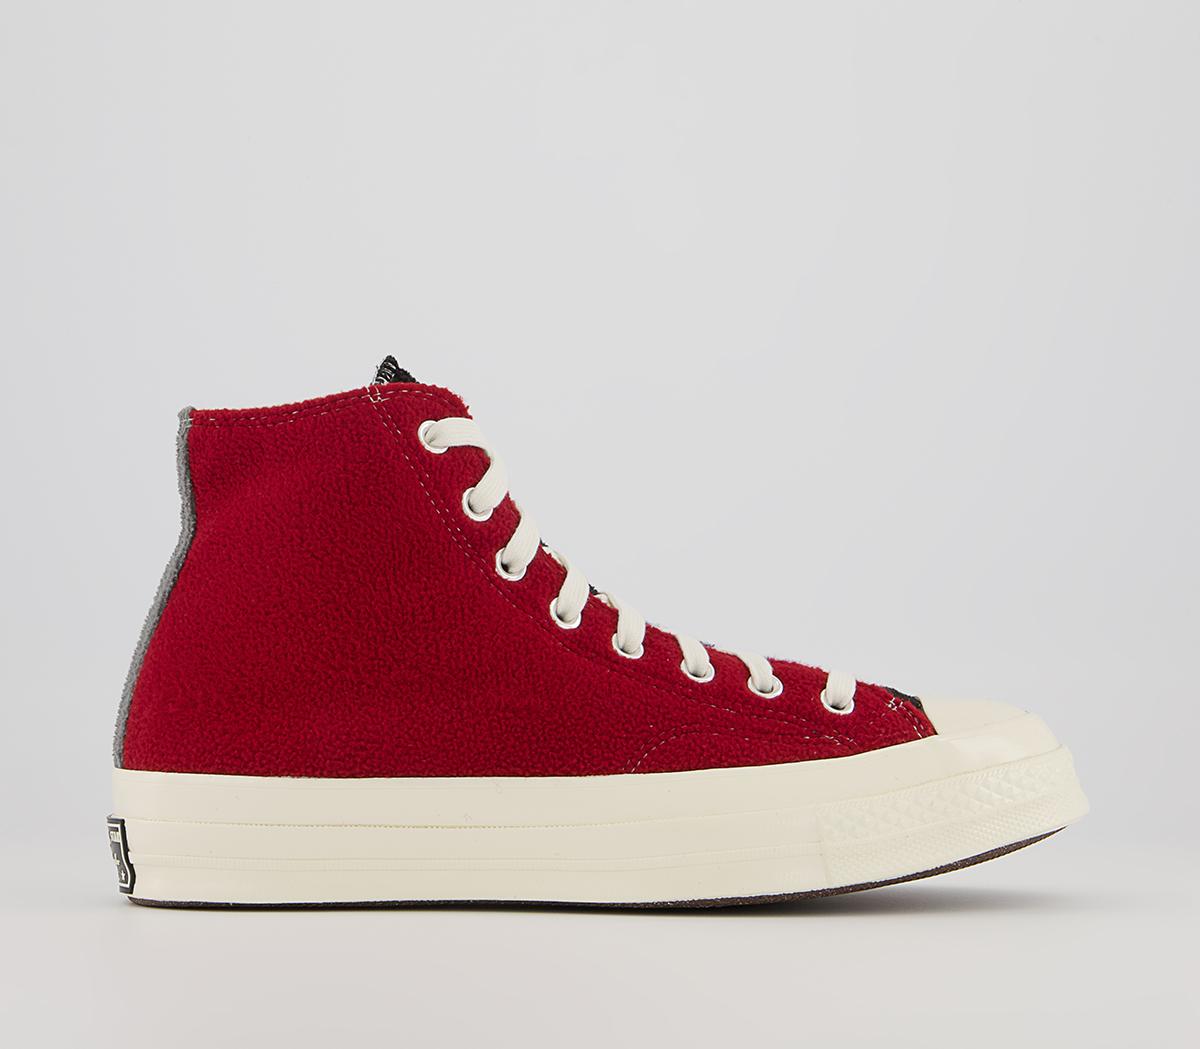 ConverseAll Star Hi 70s TrainersBeyond Retro Red Blue